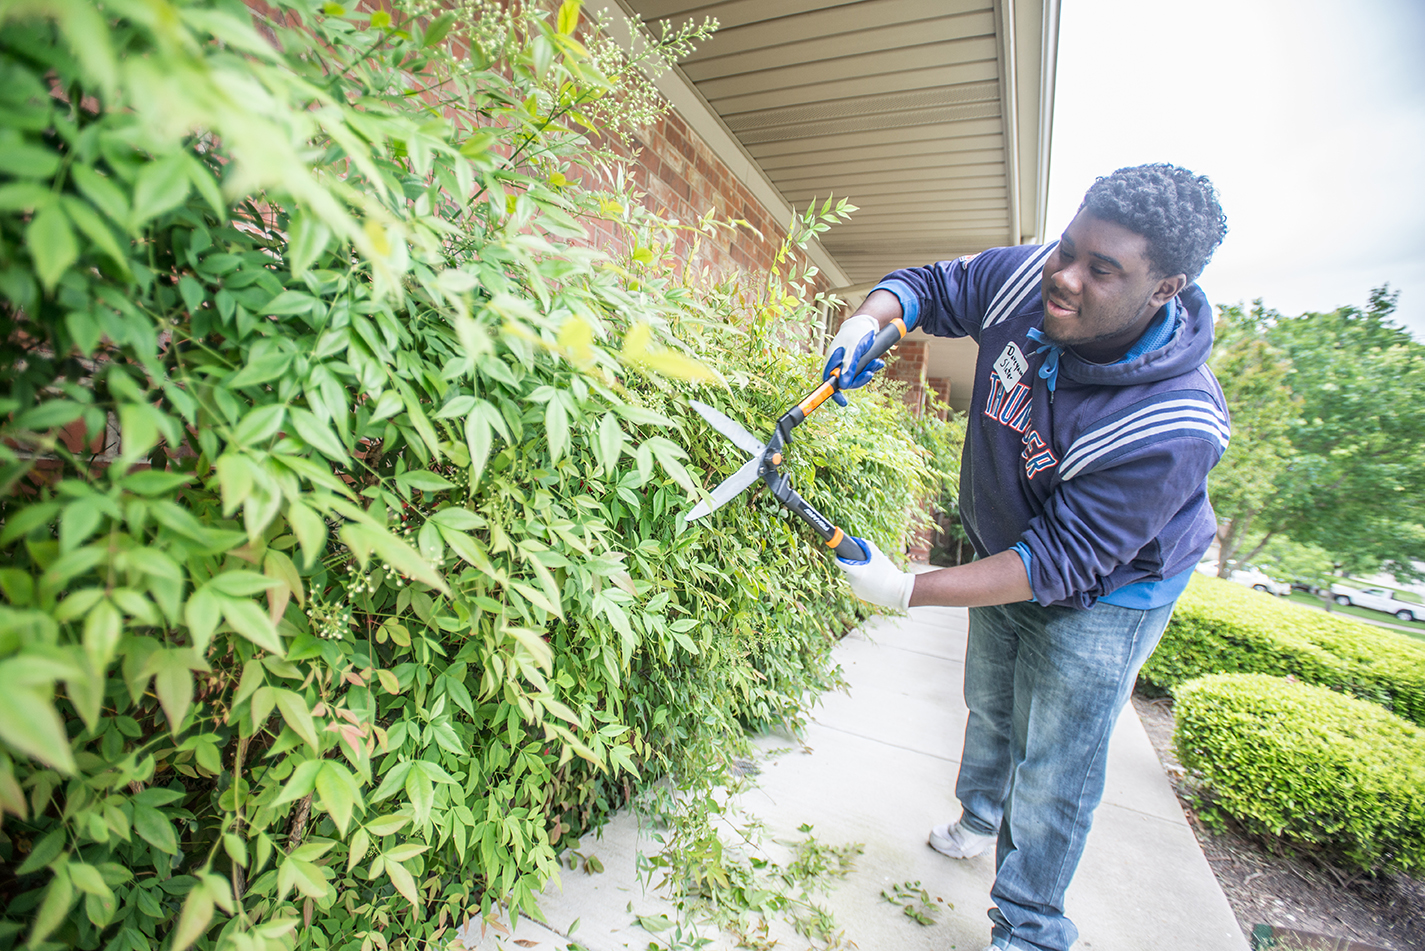 TR student Daveyaun Slater trims hedges at an ACH services home in south Fort Worth. The “Pretty” Park Pavilion group cleaned up yards, a playground and a home.